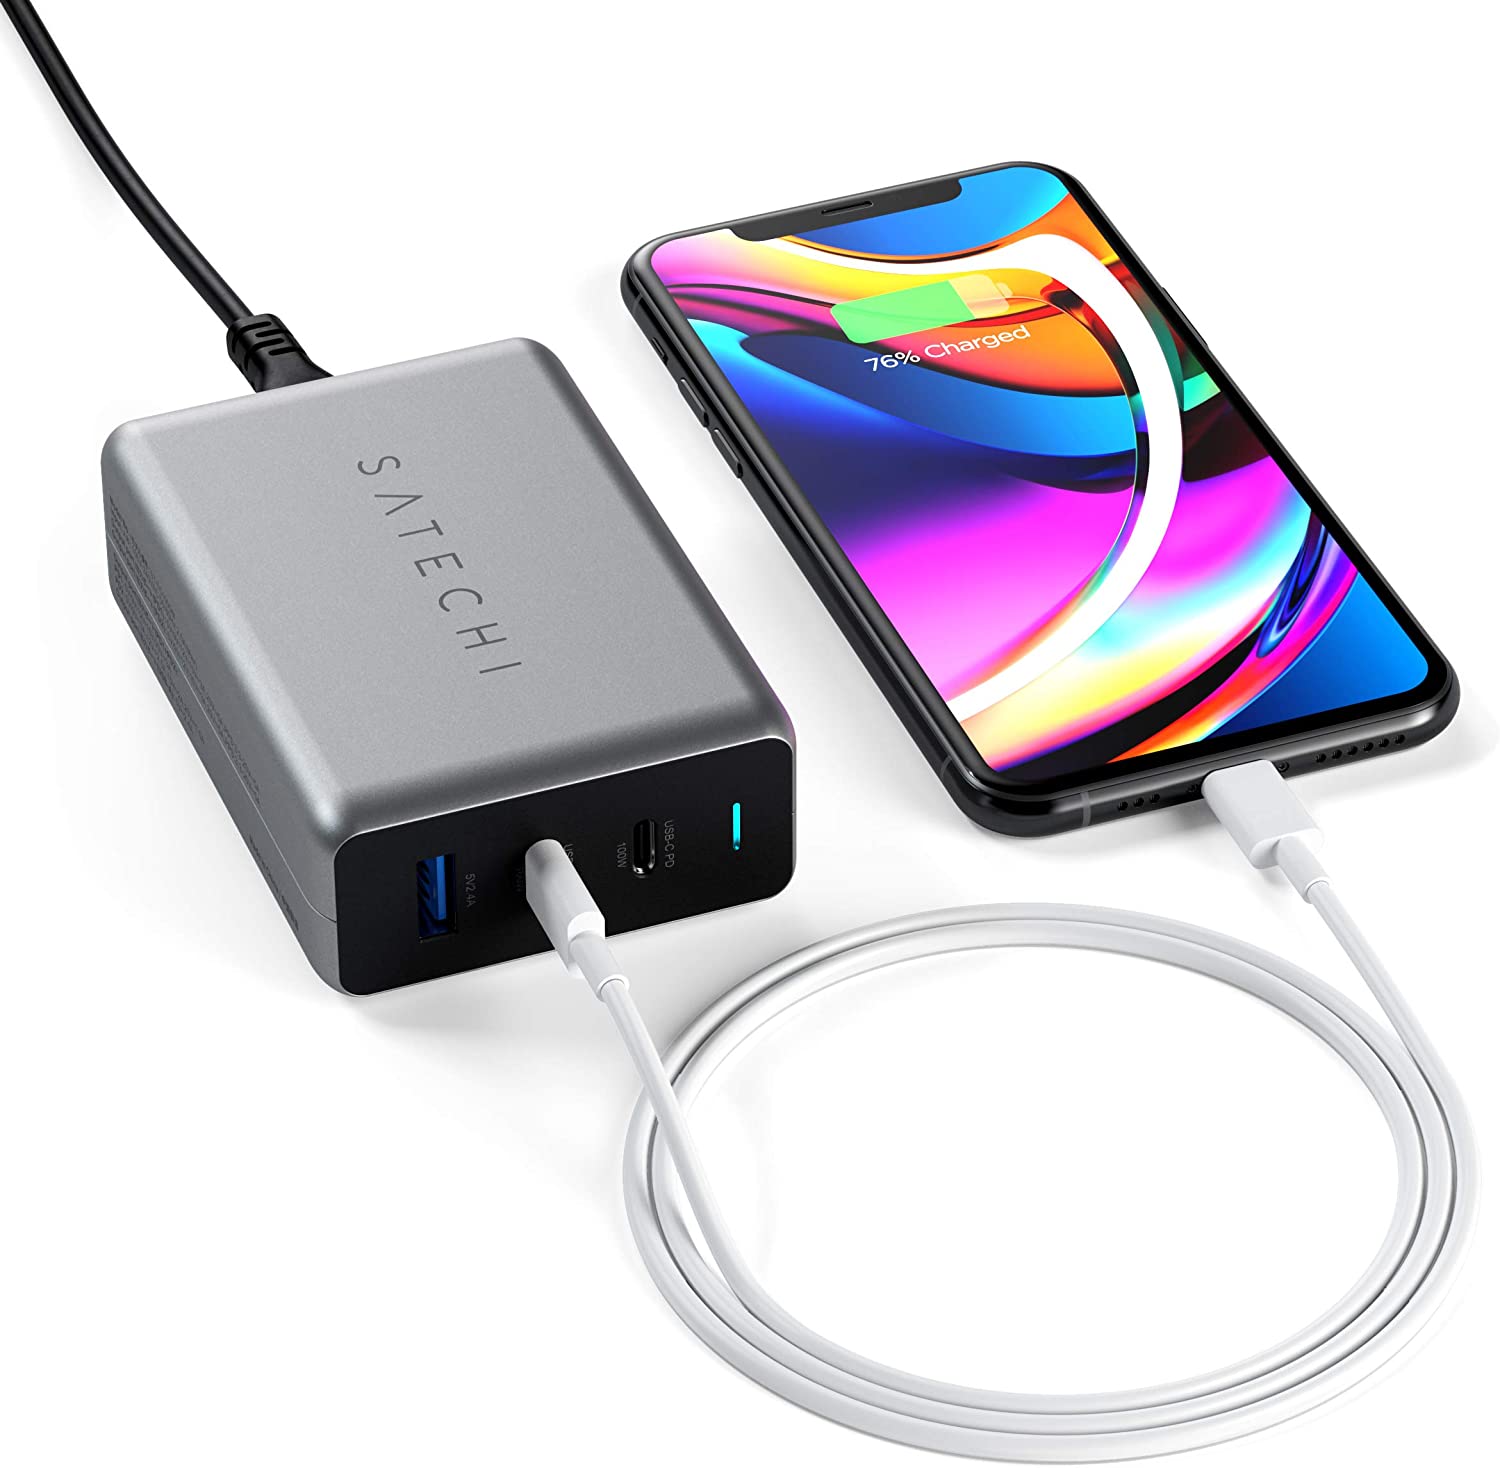 Satechi Portable Charger for Travel